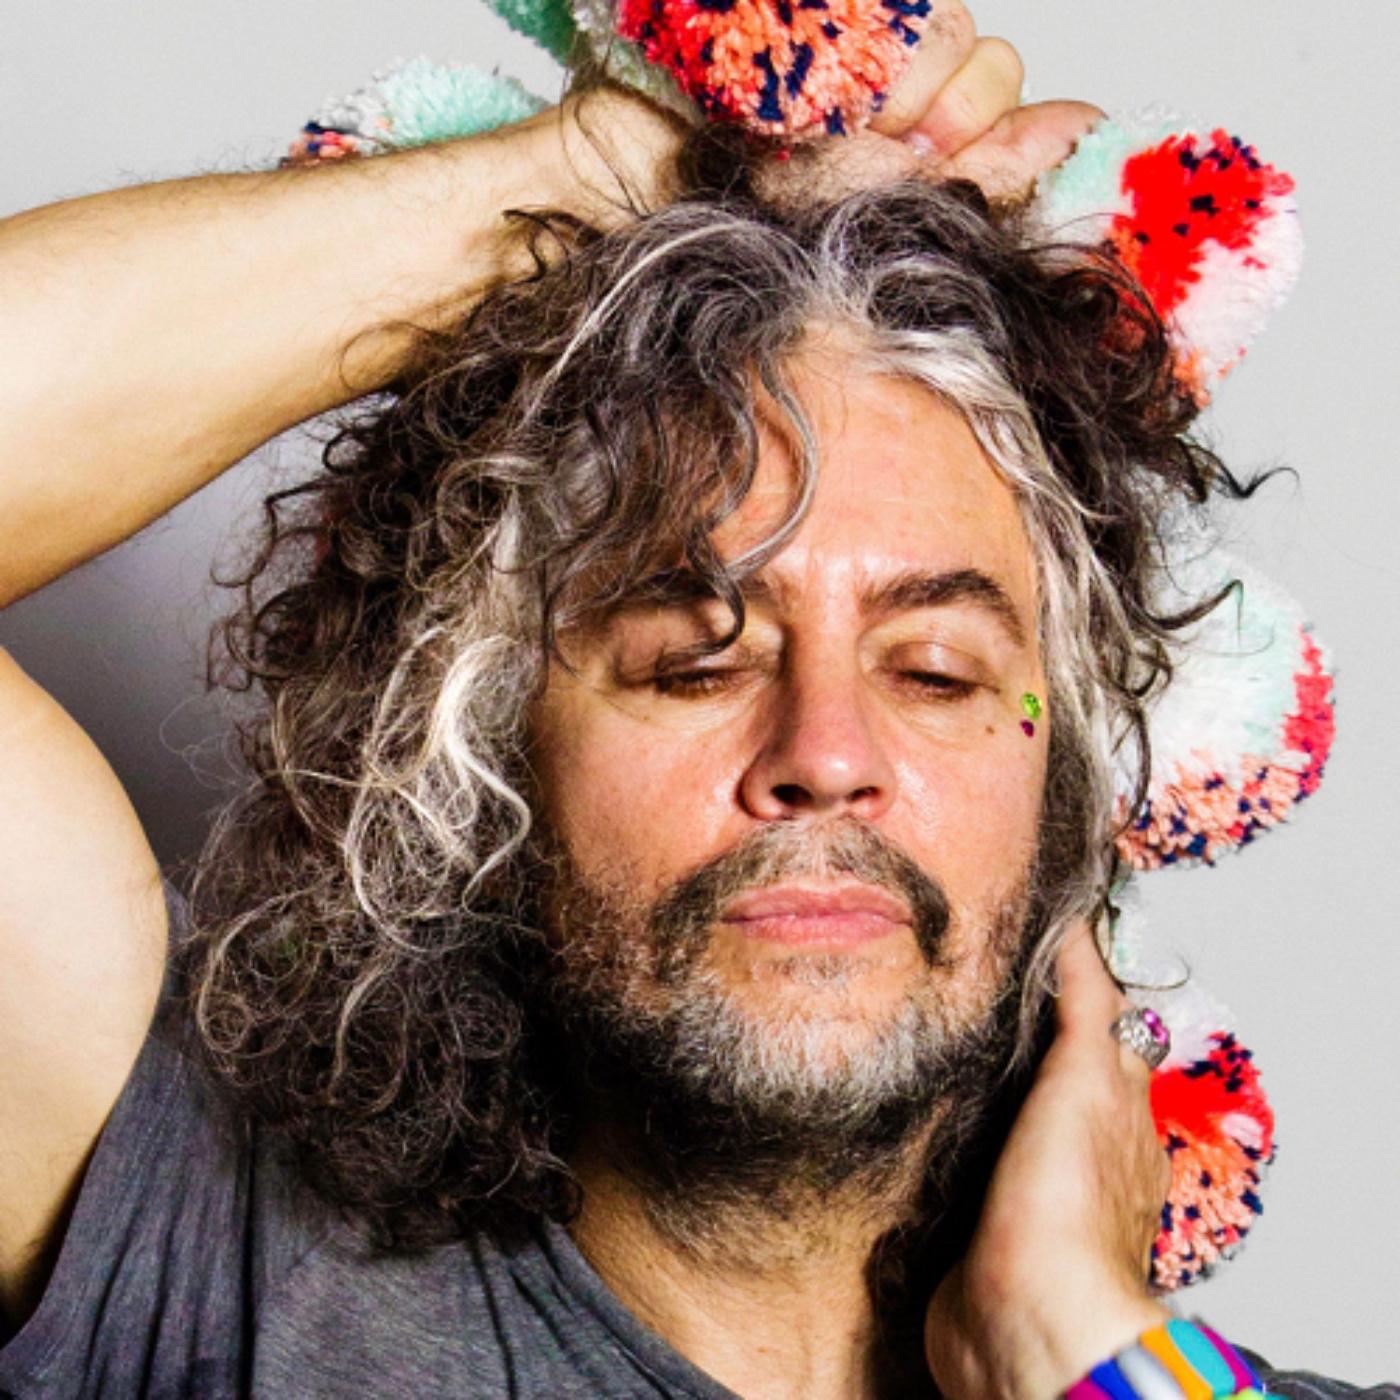 Thumbnail for "Daisy Hernández and Wayne Coyne of The Flaming Lips".